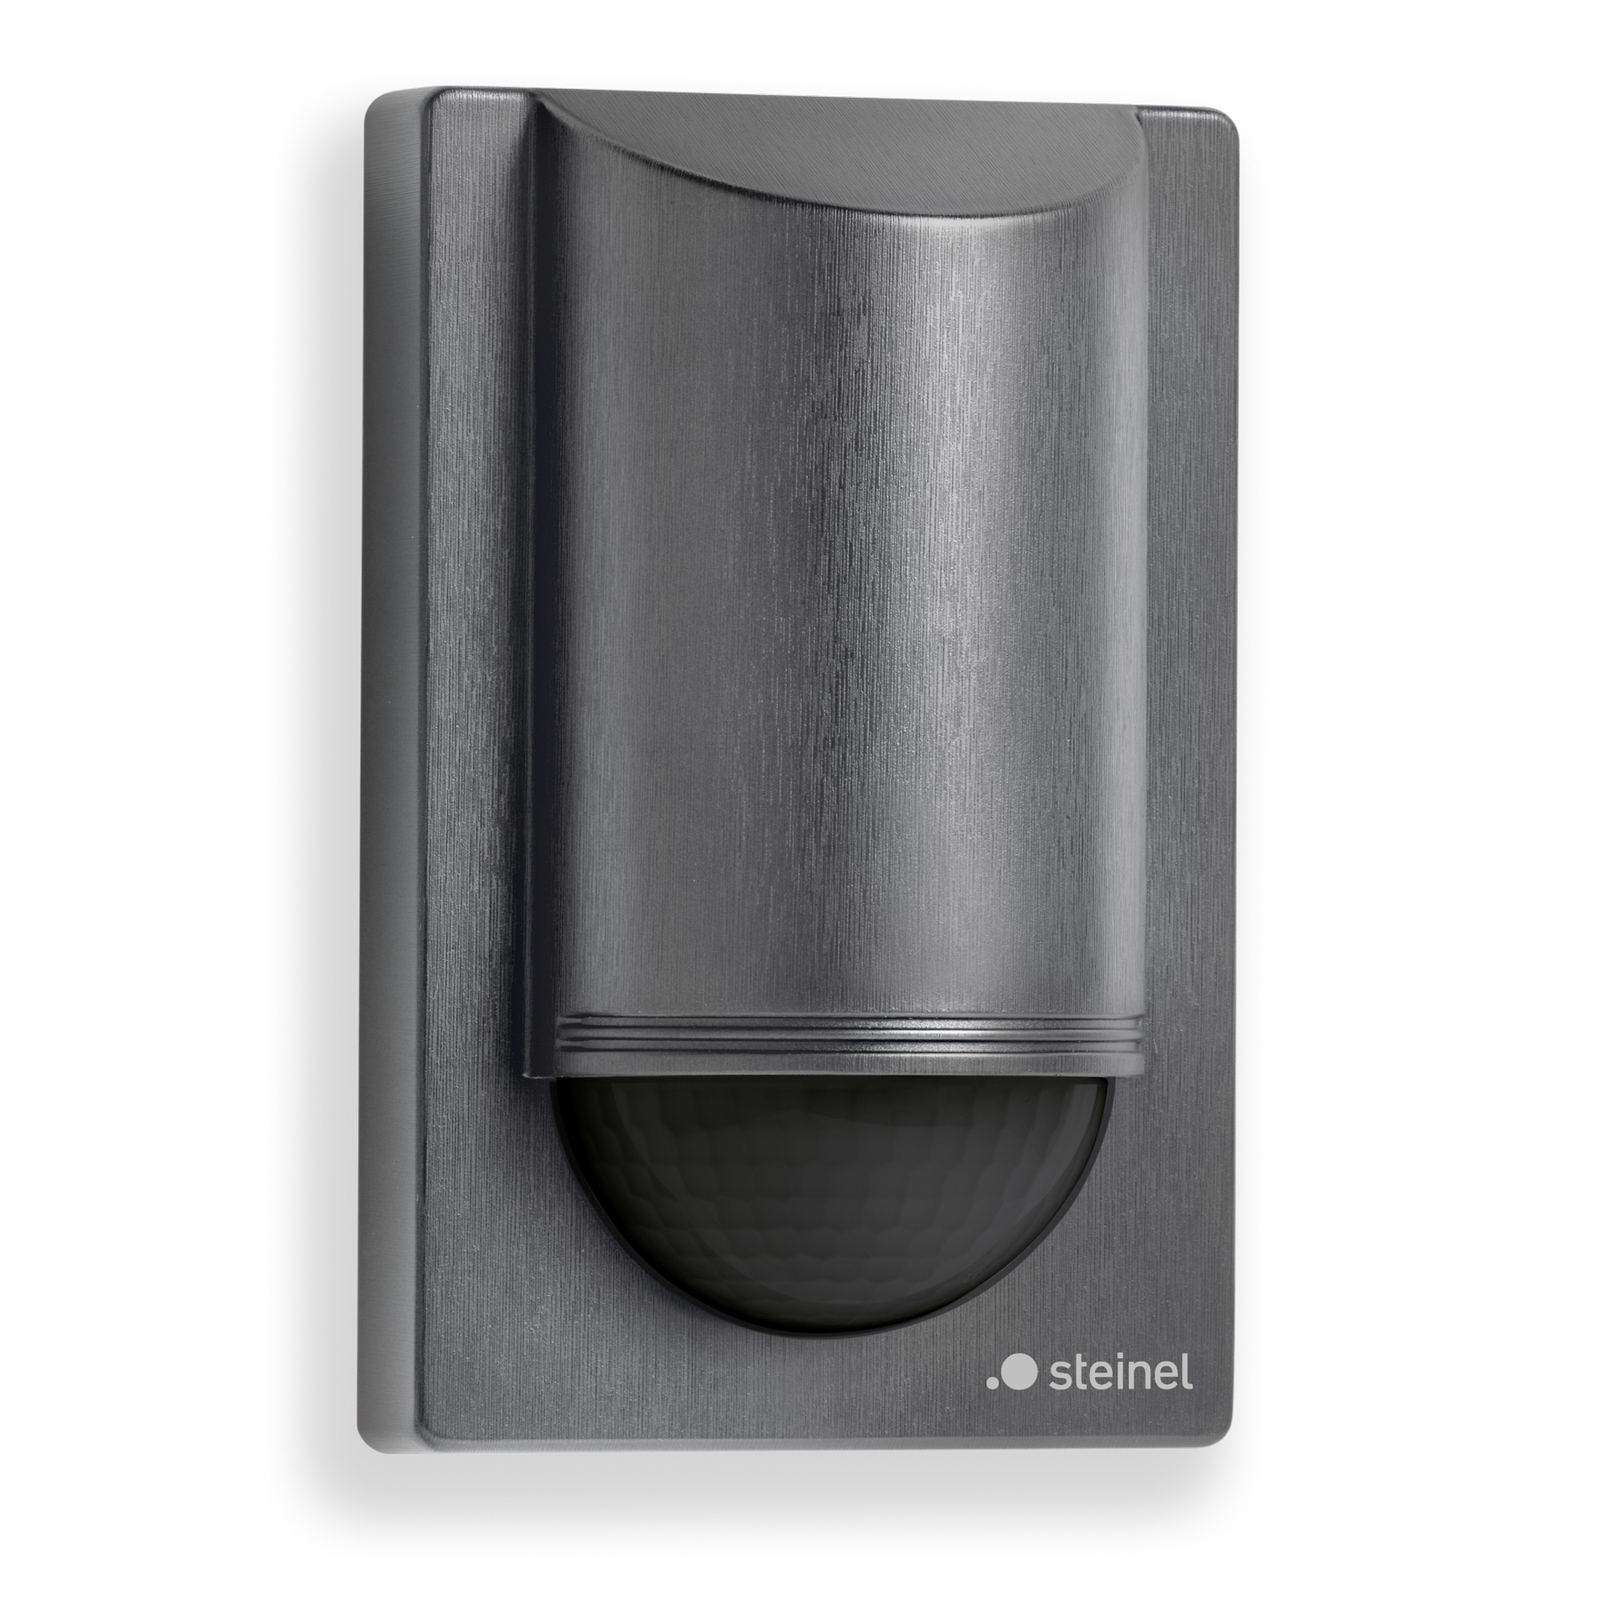 STEINEL IS 2180 ECO motion detector, anthracite